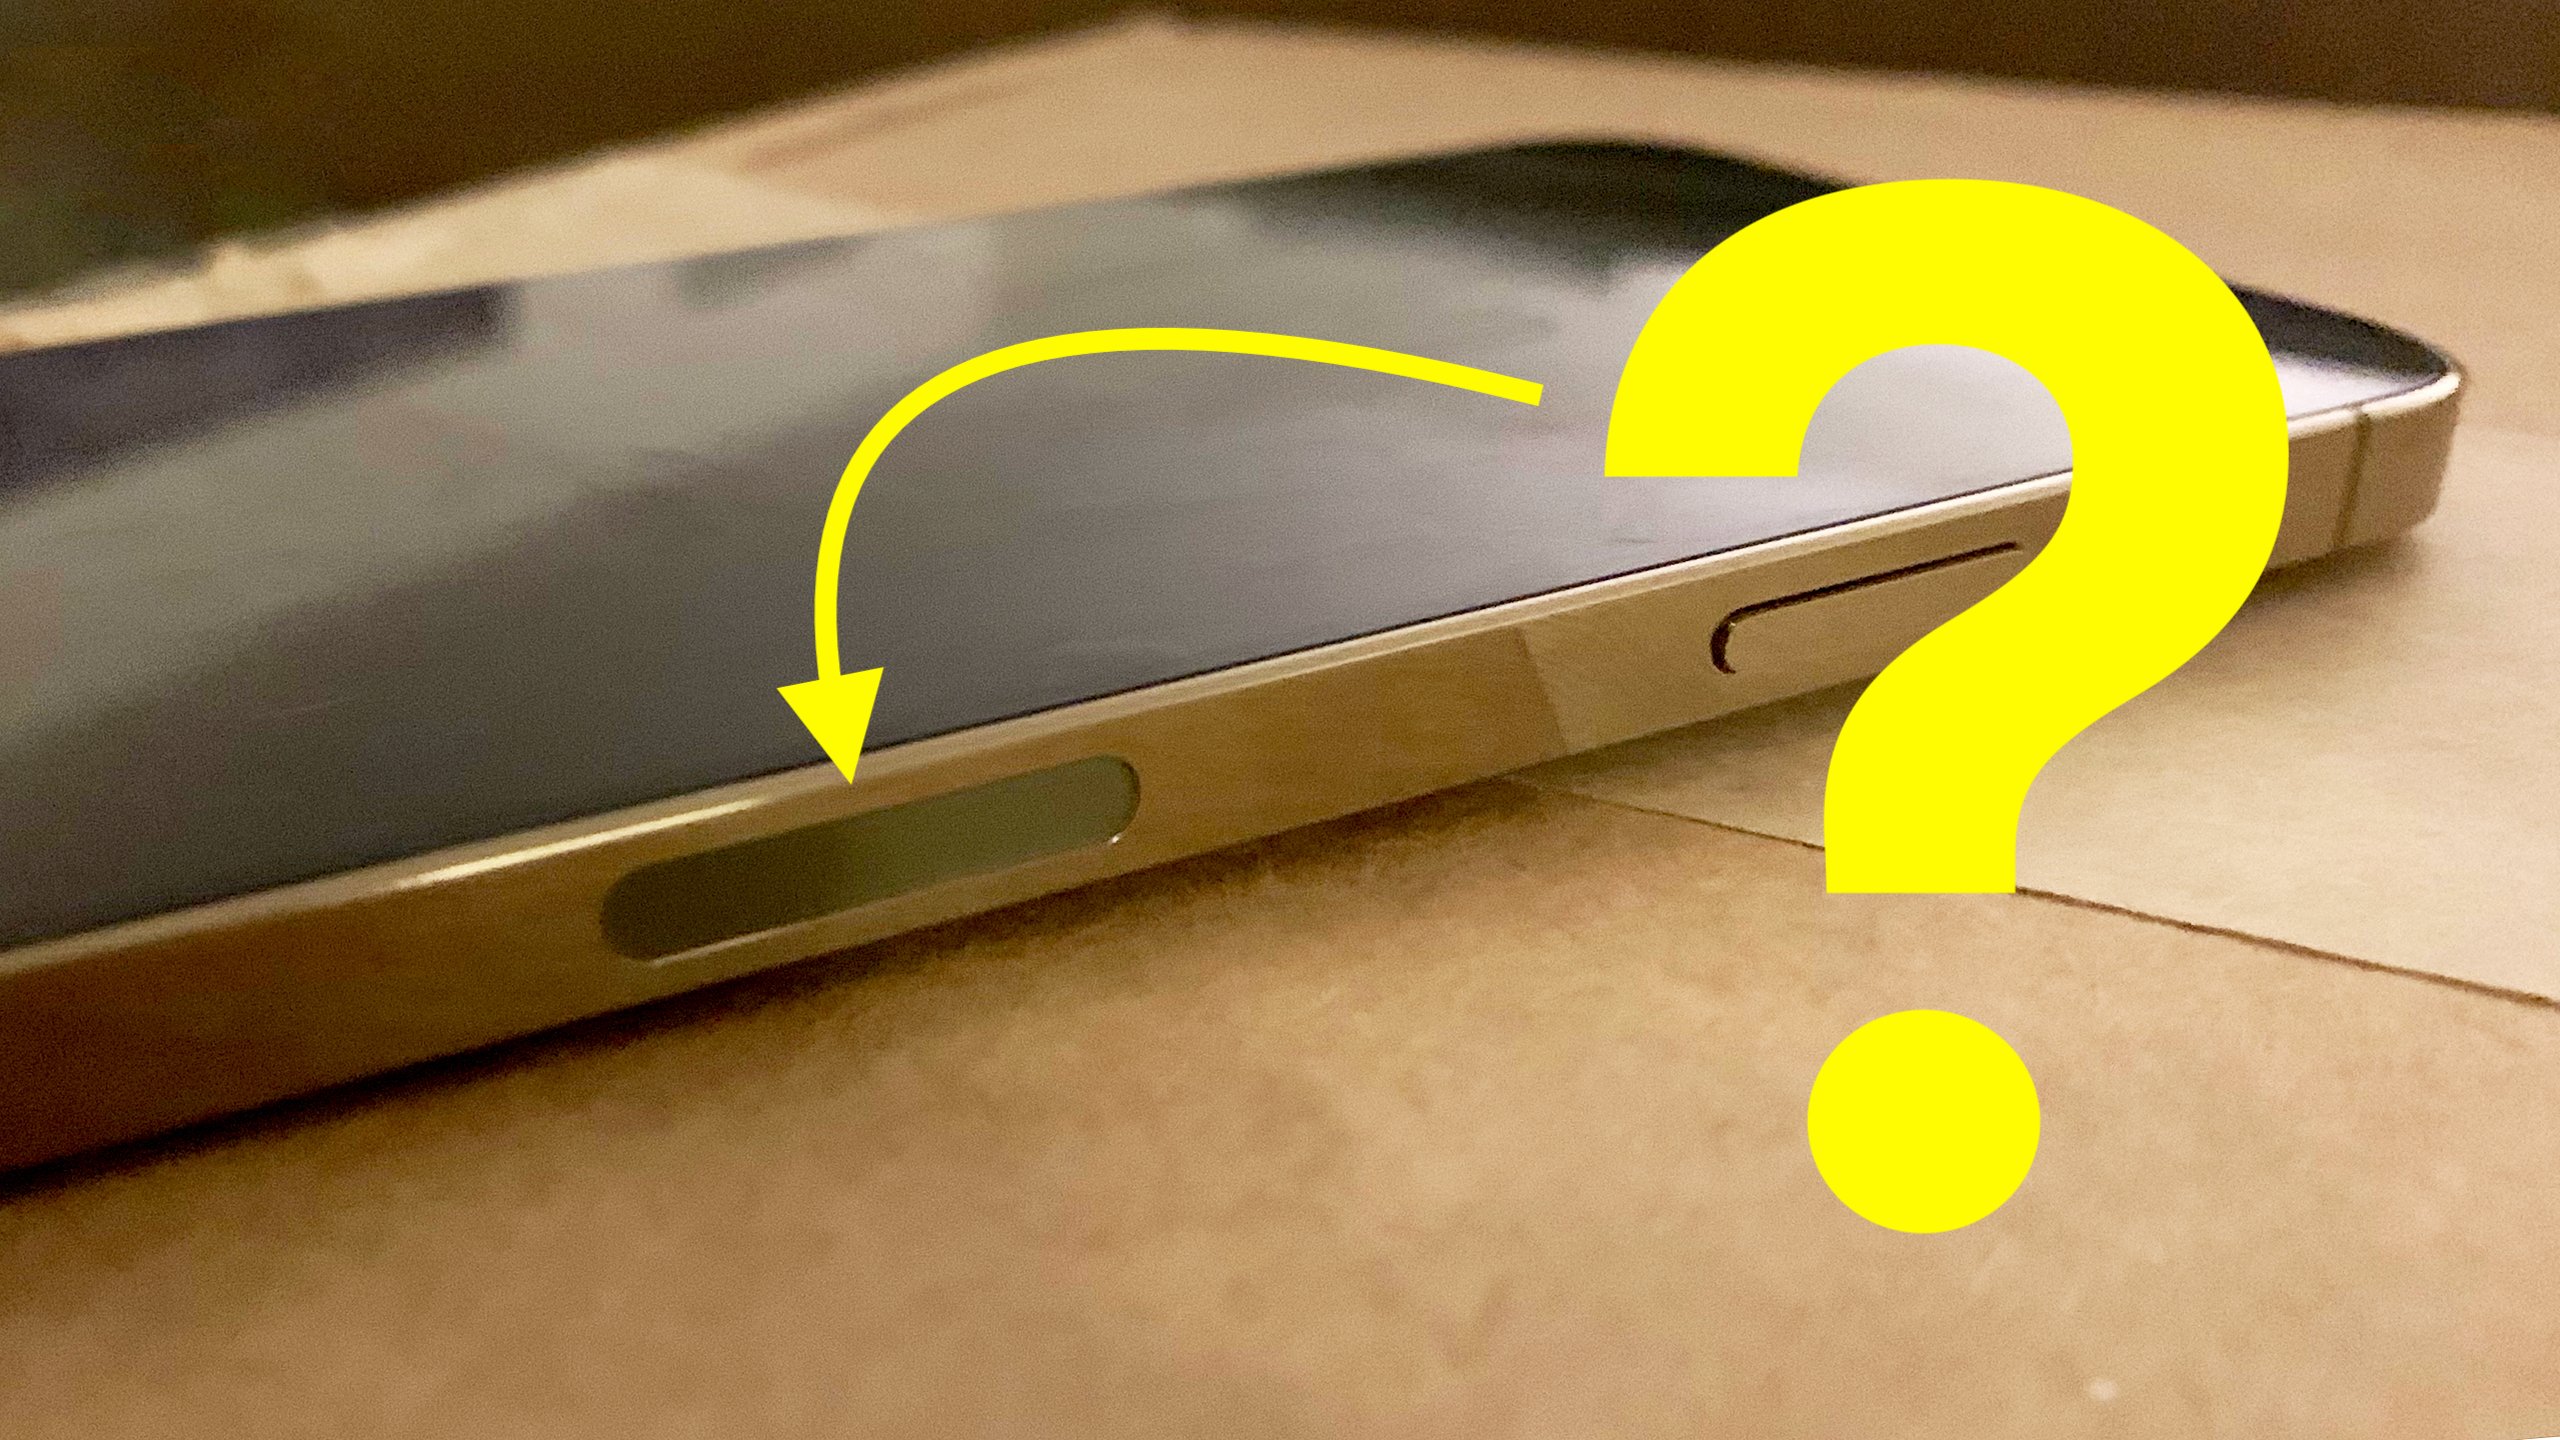 Why The iPhone 12 Has A Black Oval Indentation On The Side - Payette Forward